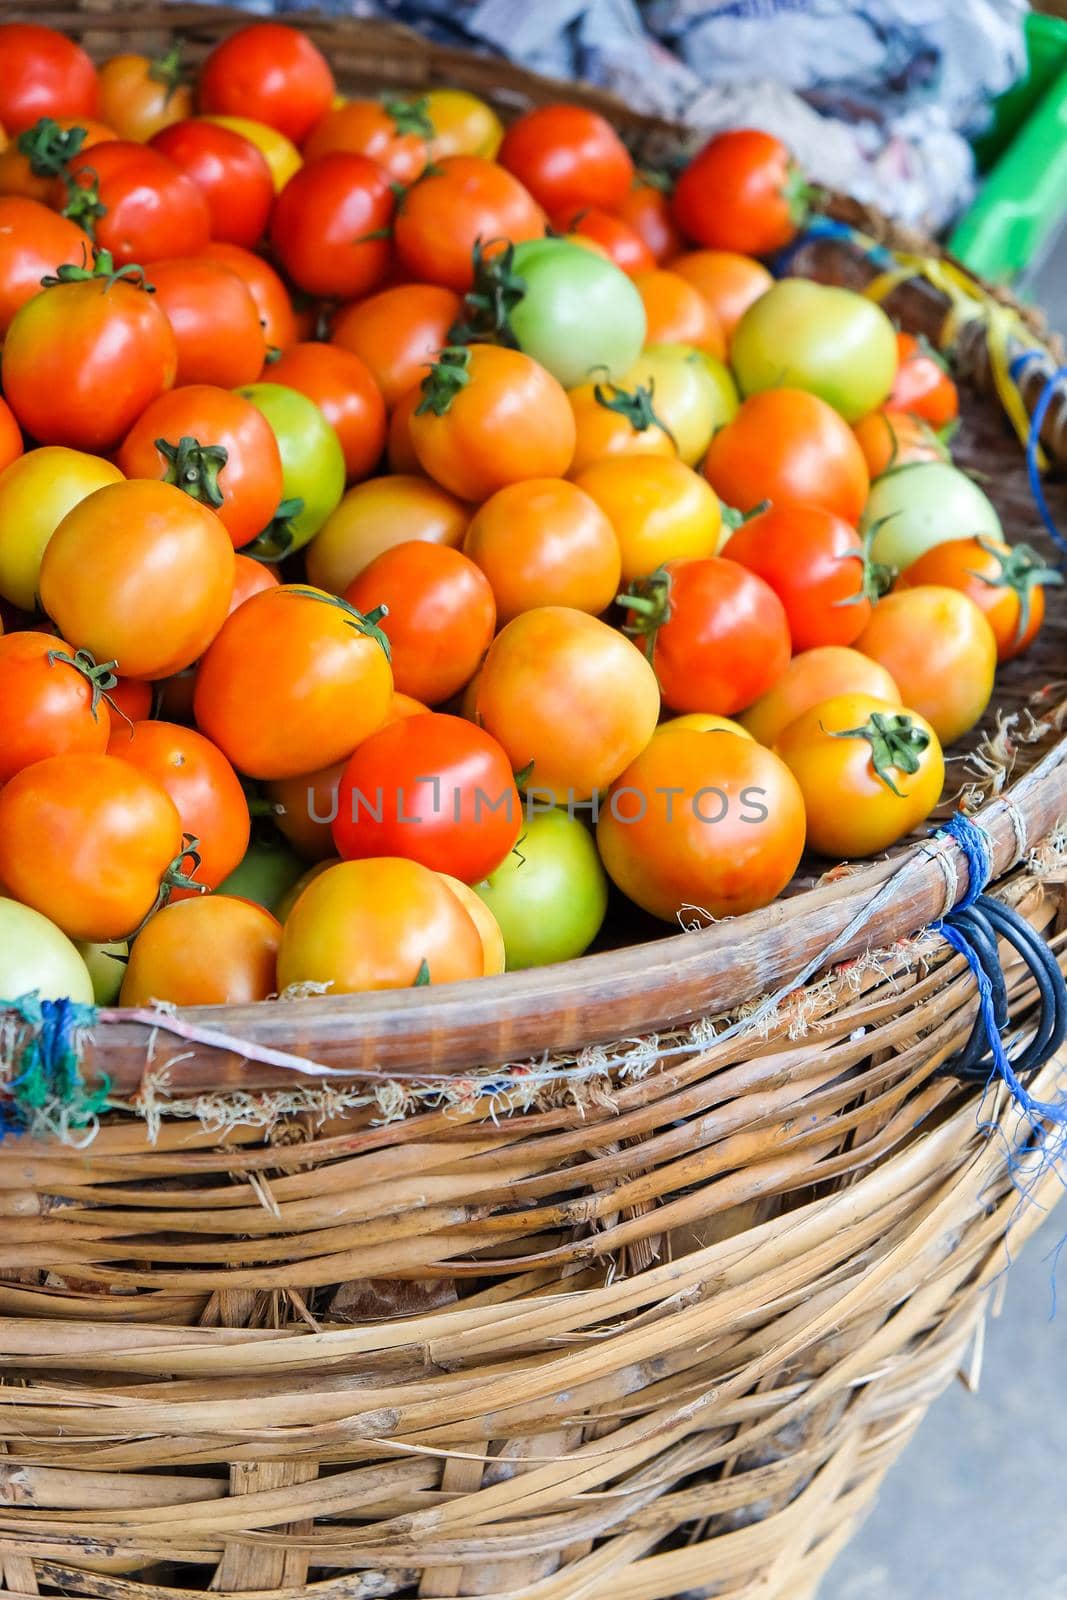 Ripe Tomatoes on street market by ponsulak